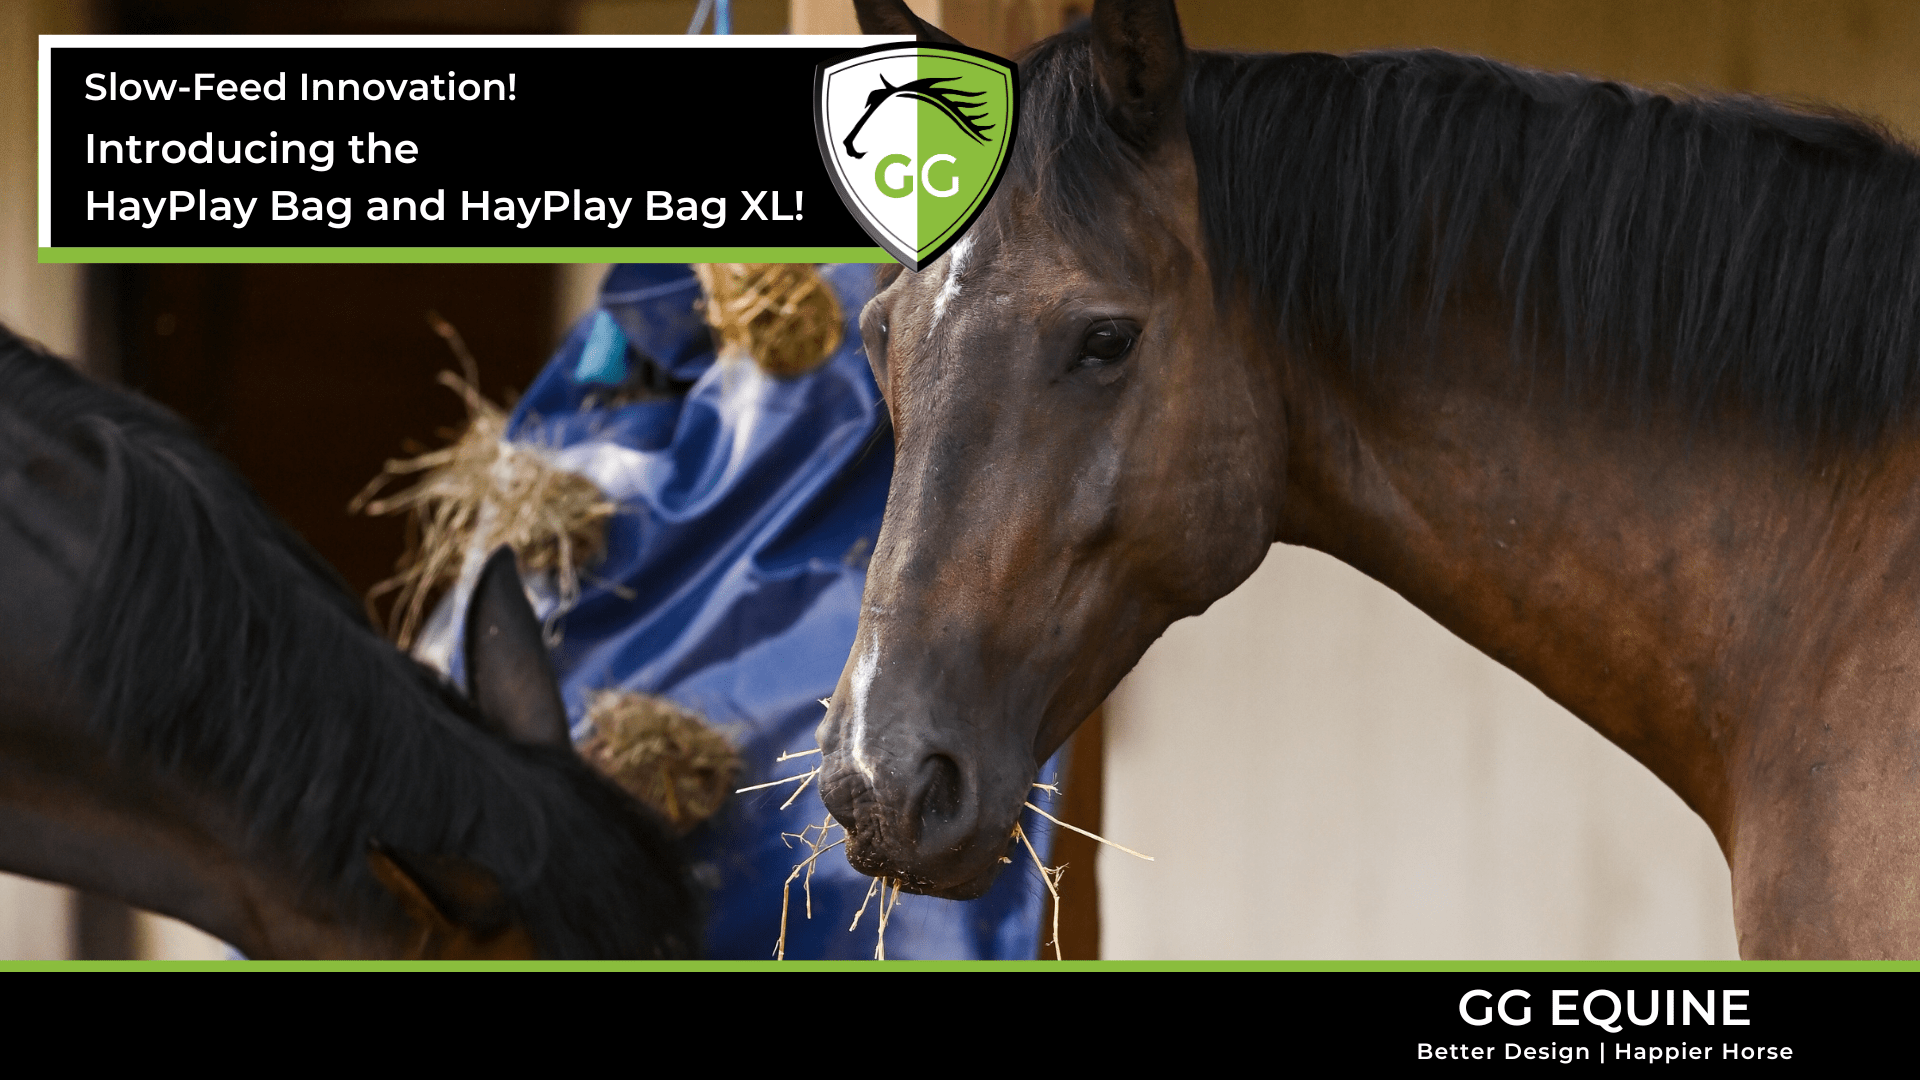 Cargar vídeo: An introductory look at the features of the HayPlay Bag slow-feeder for horses.